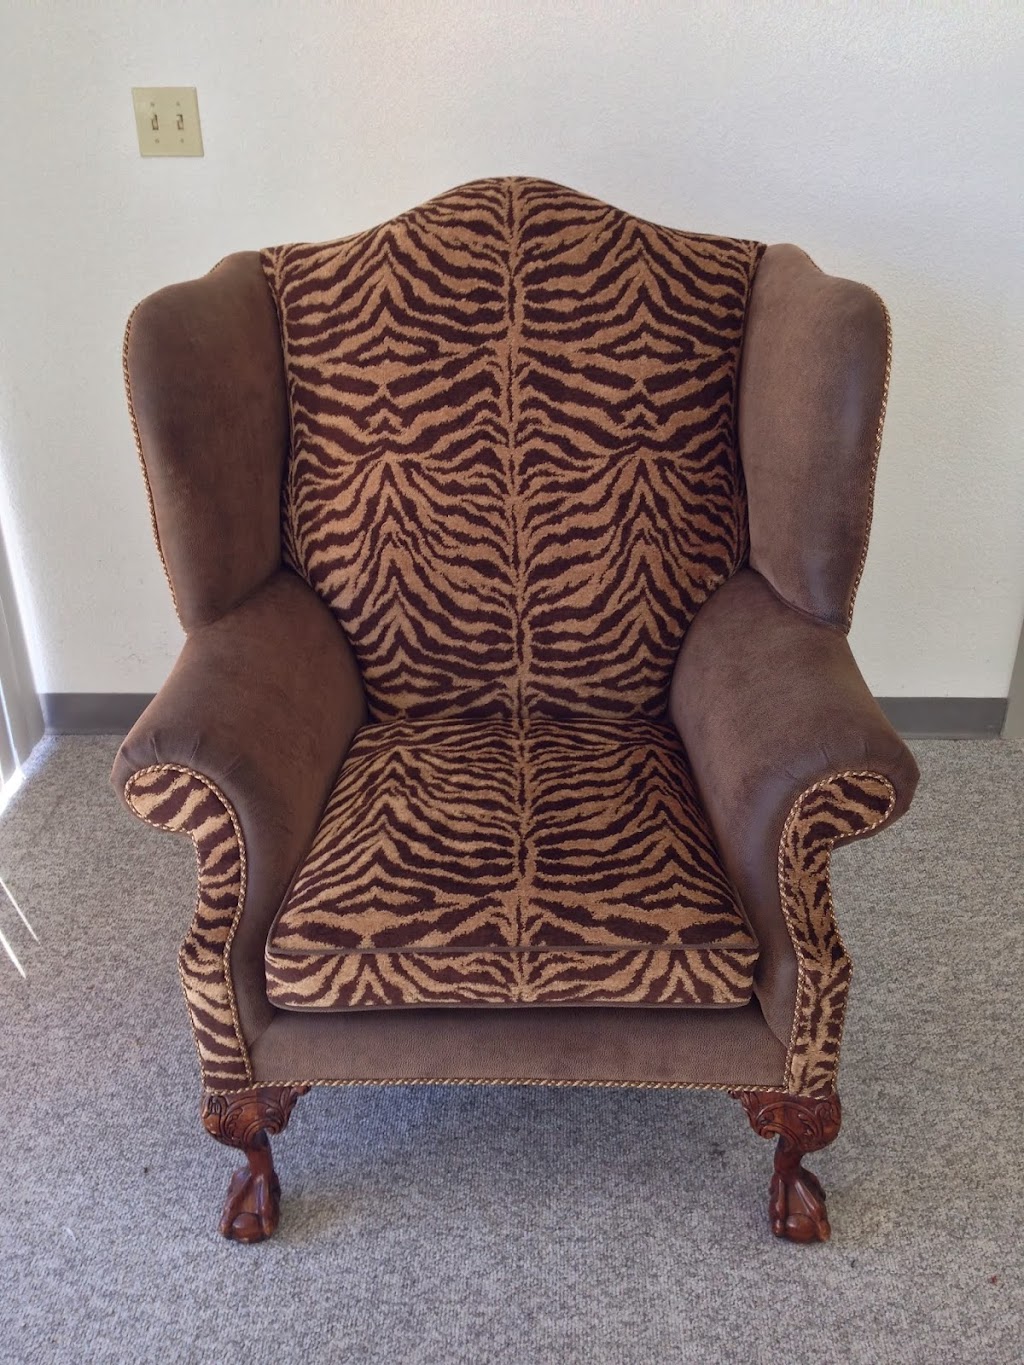 Anns Upholstery | 7525 Main St, The Colony, TX 75056, USA | Phone: (972) 731-8188